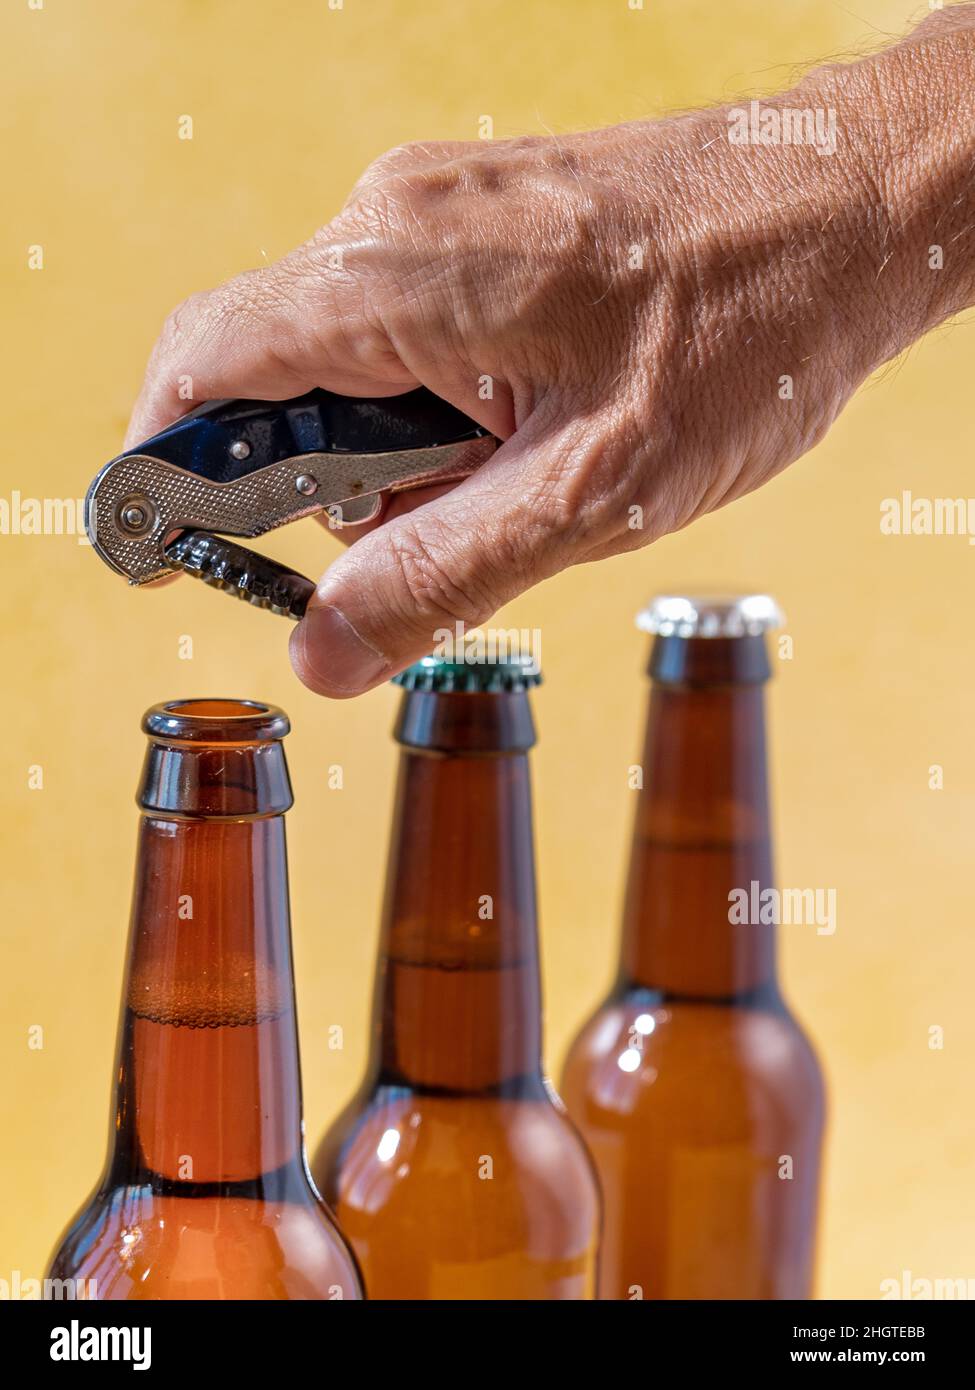 Hand opening beer bottle with blurred background Stock Photo